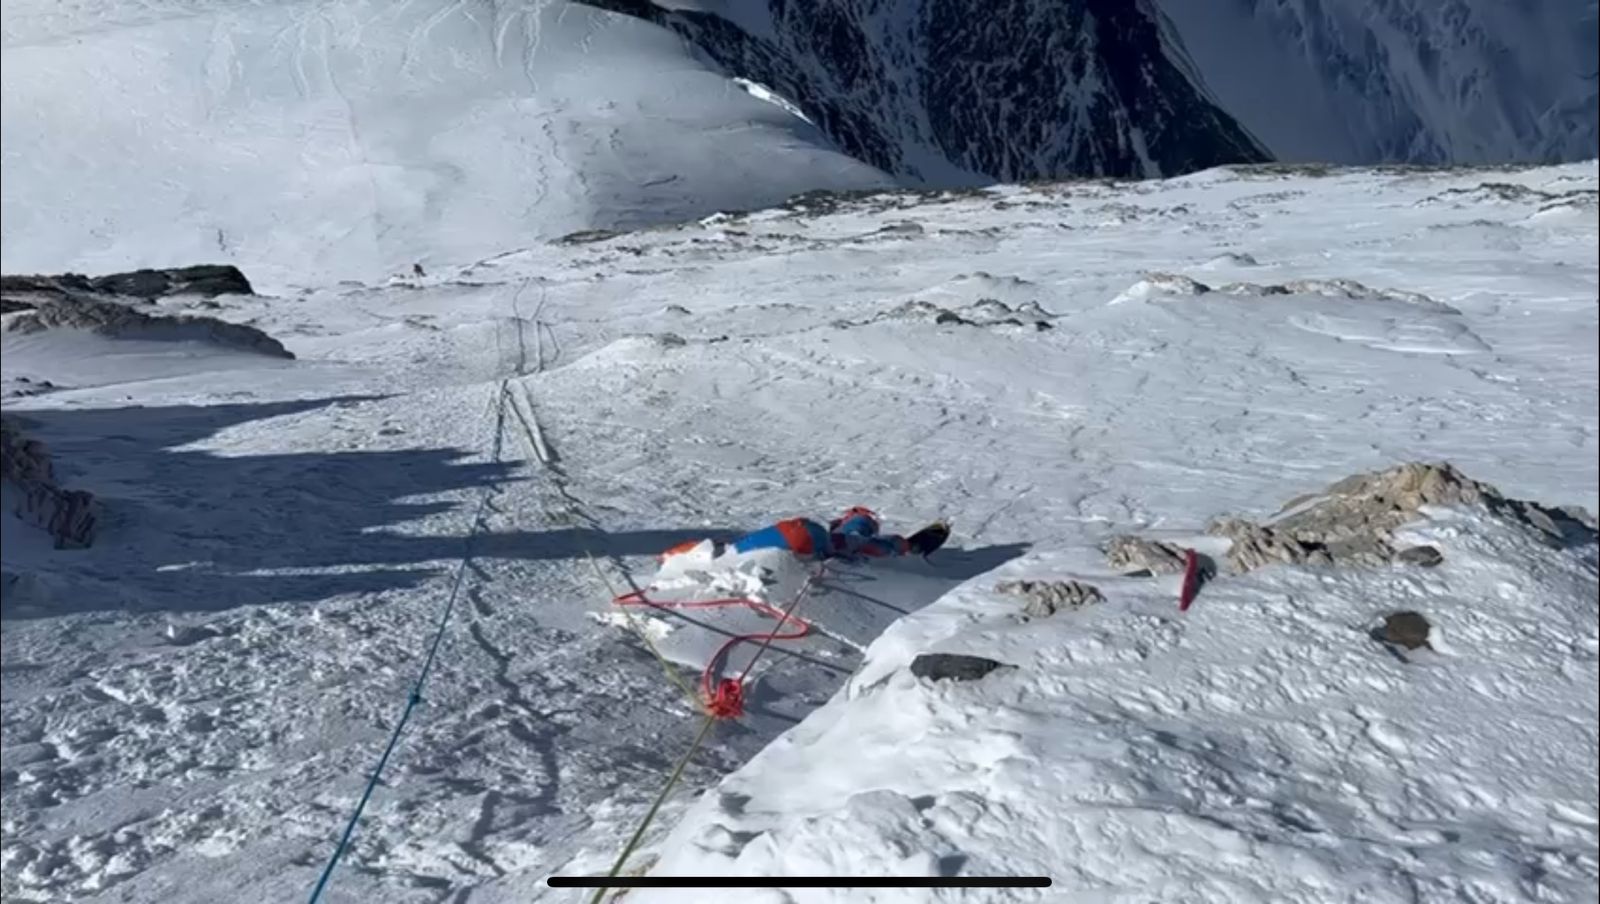 A dead body on the snow on Everest and ropes going down the slope